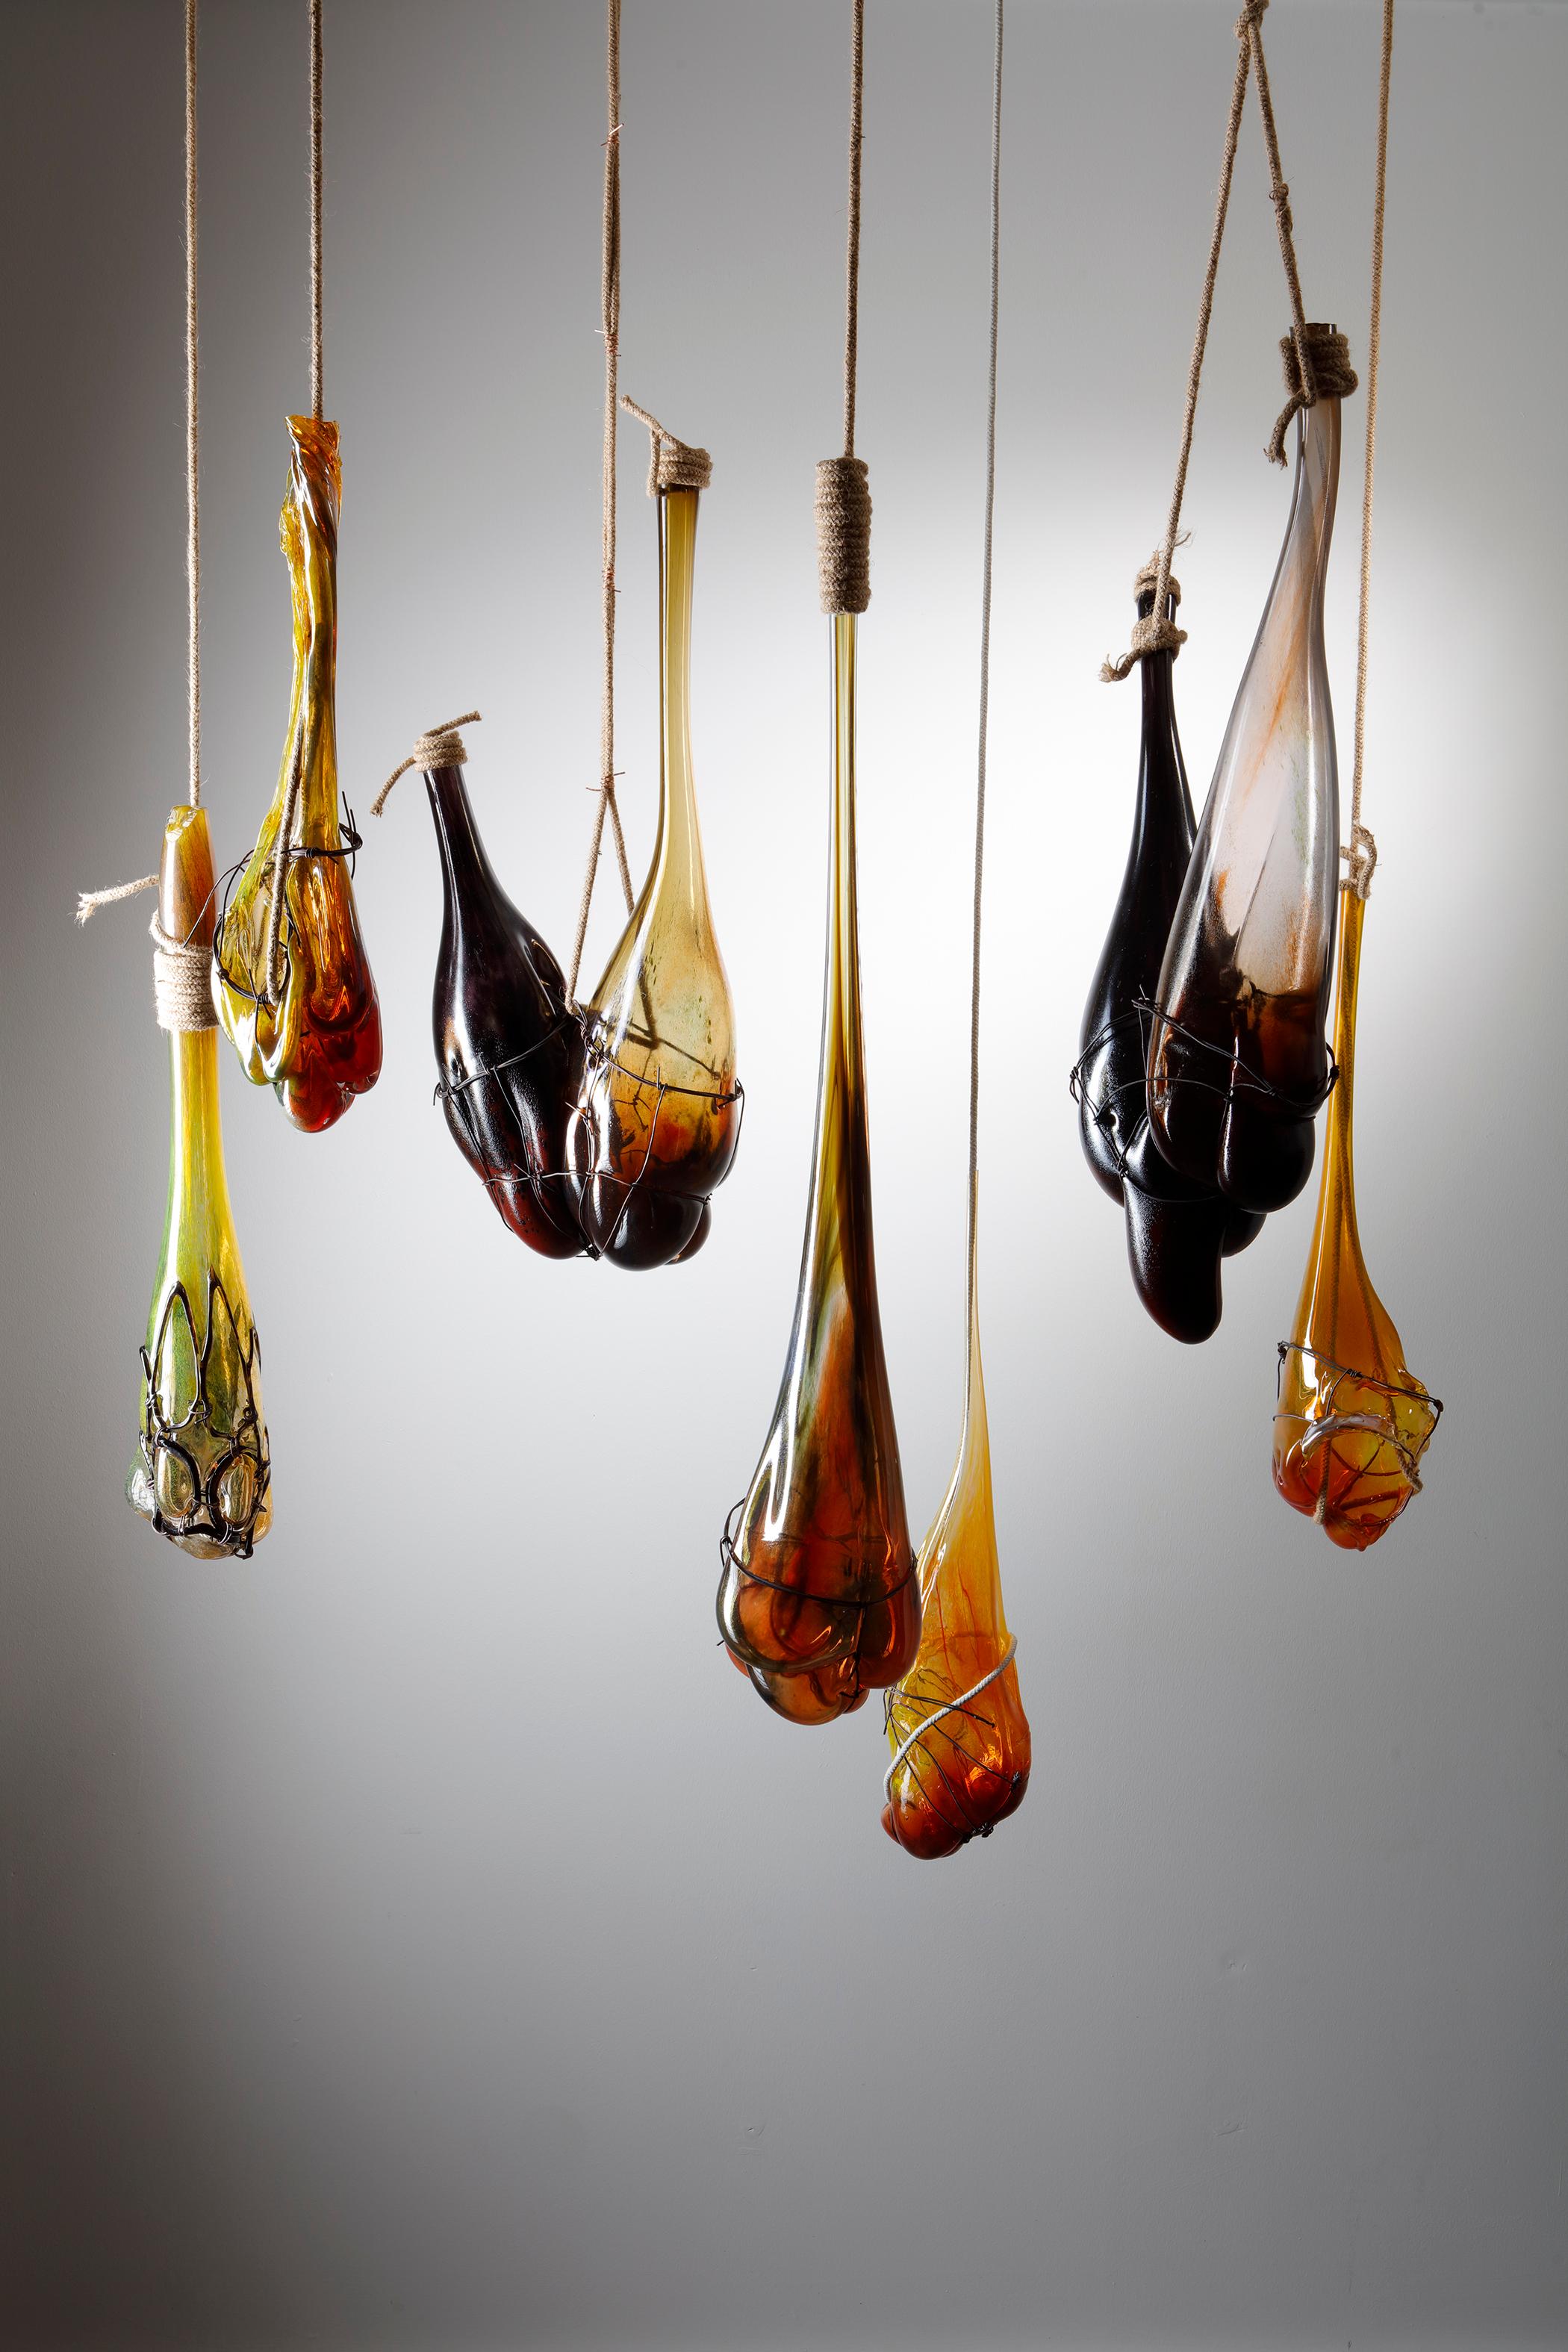 Organic Modern Strange Fruit Installation, a Unique Glass Hanging Sculpture by Chris Day